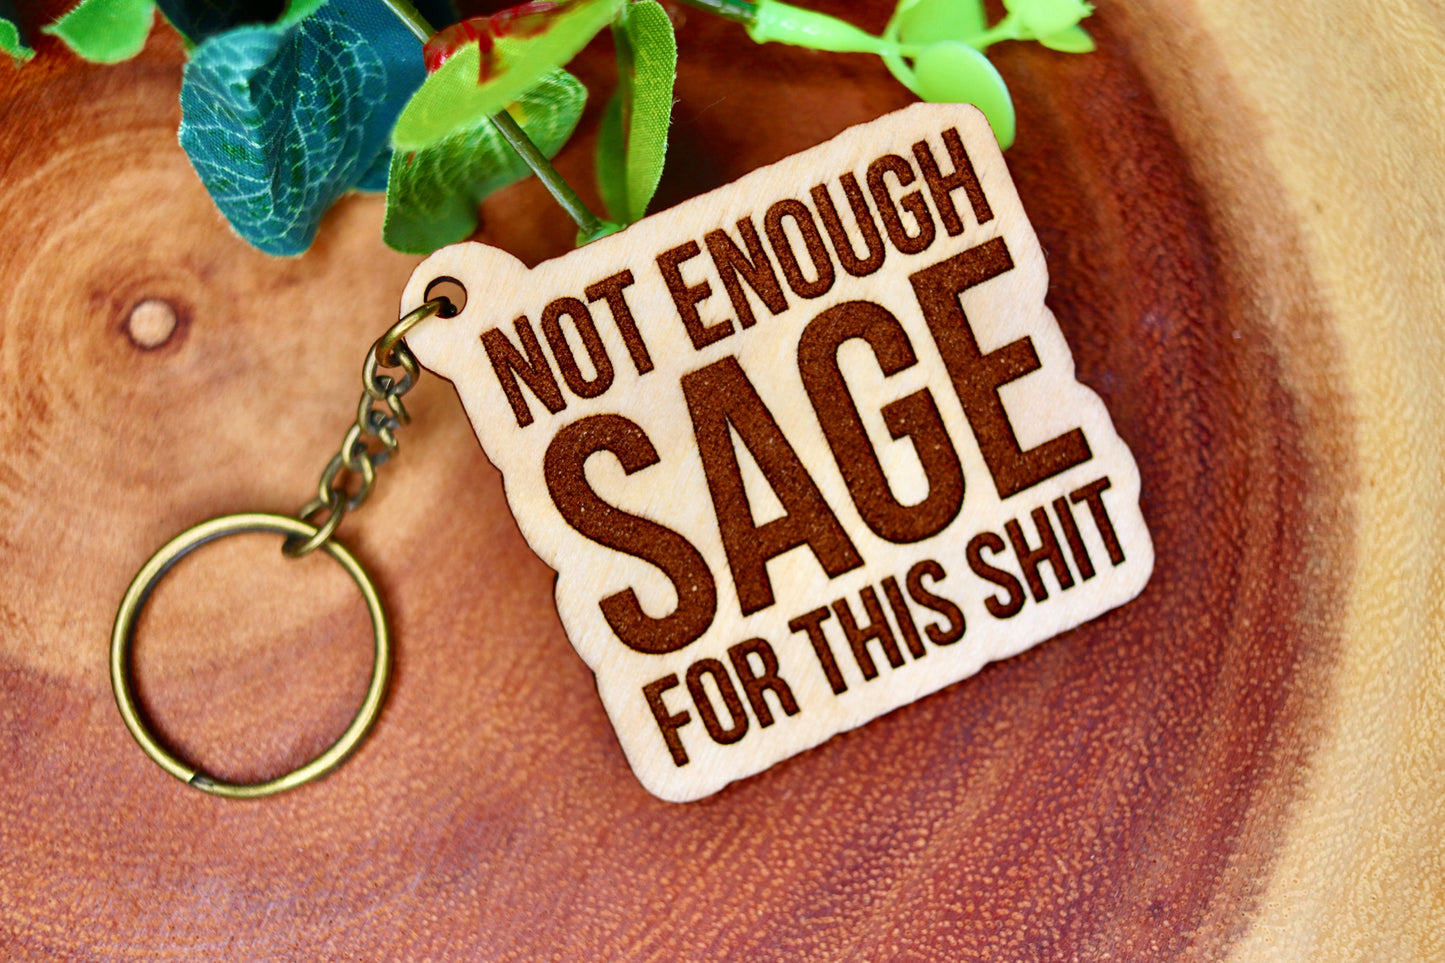 Not enough Sage for this S*** Wooden Keychain